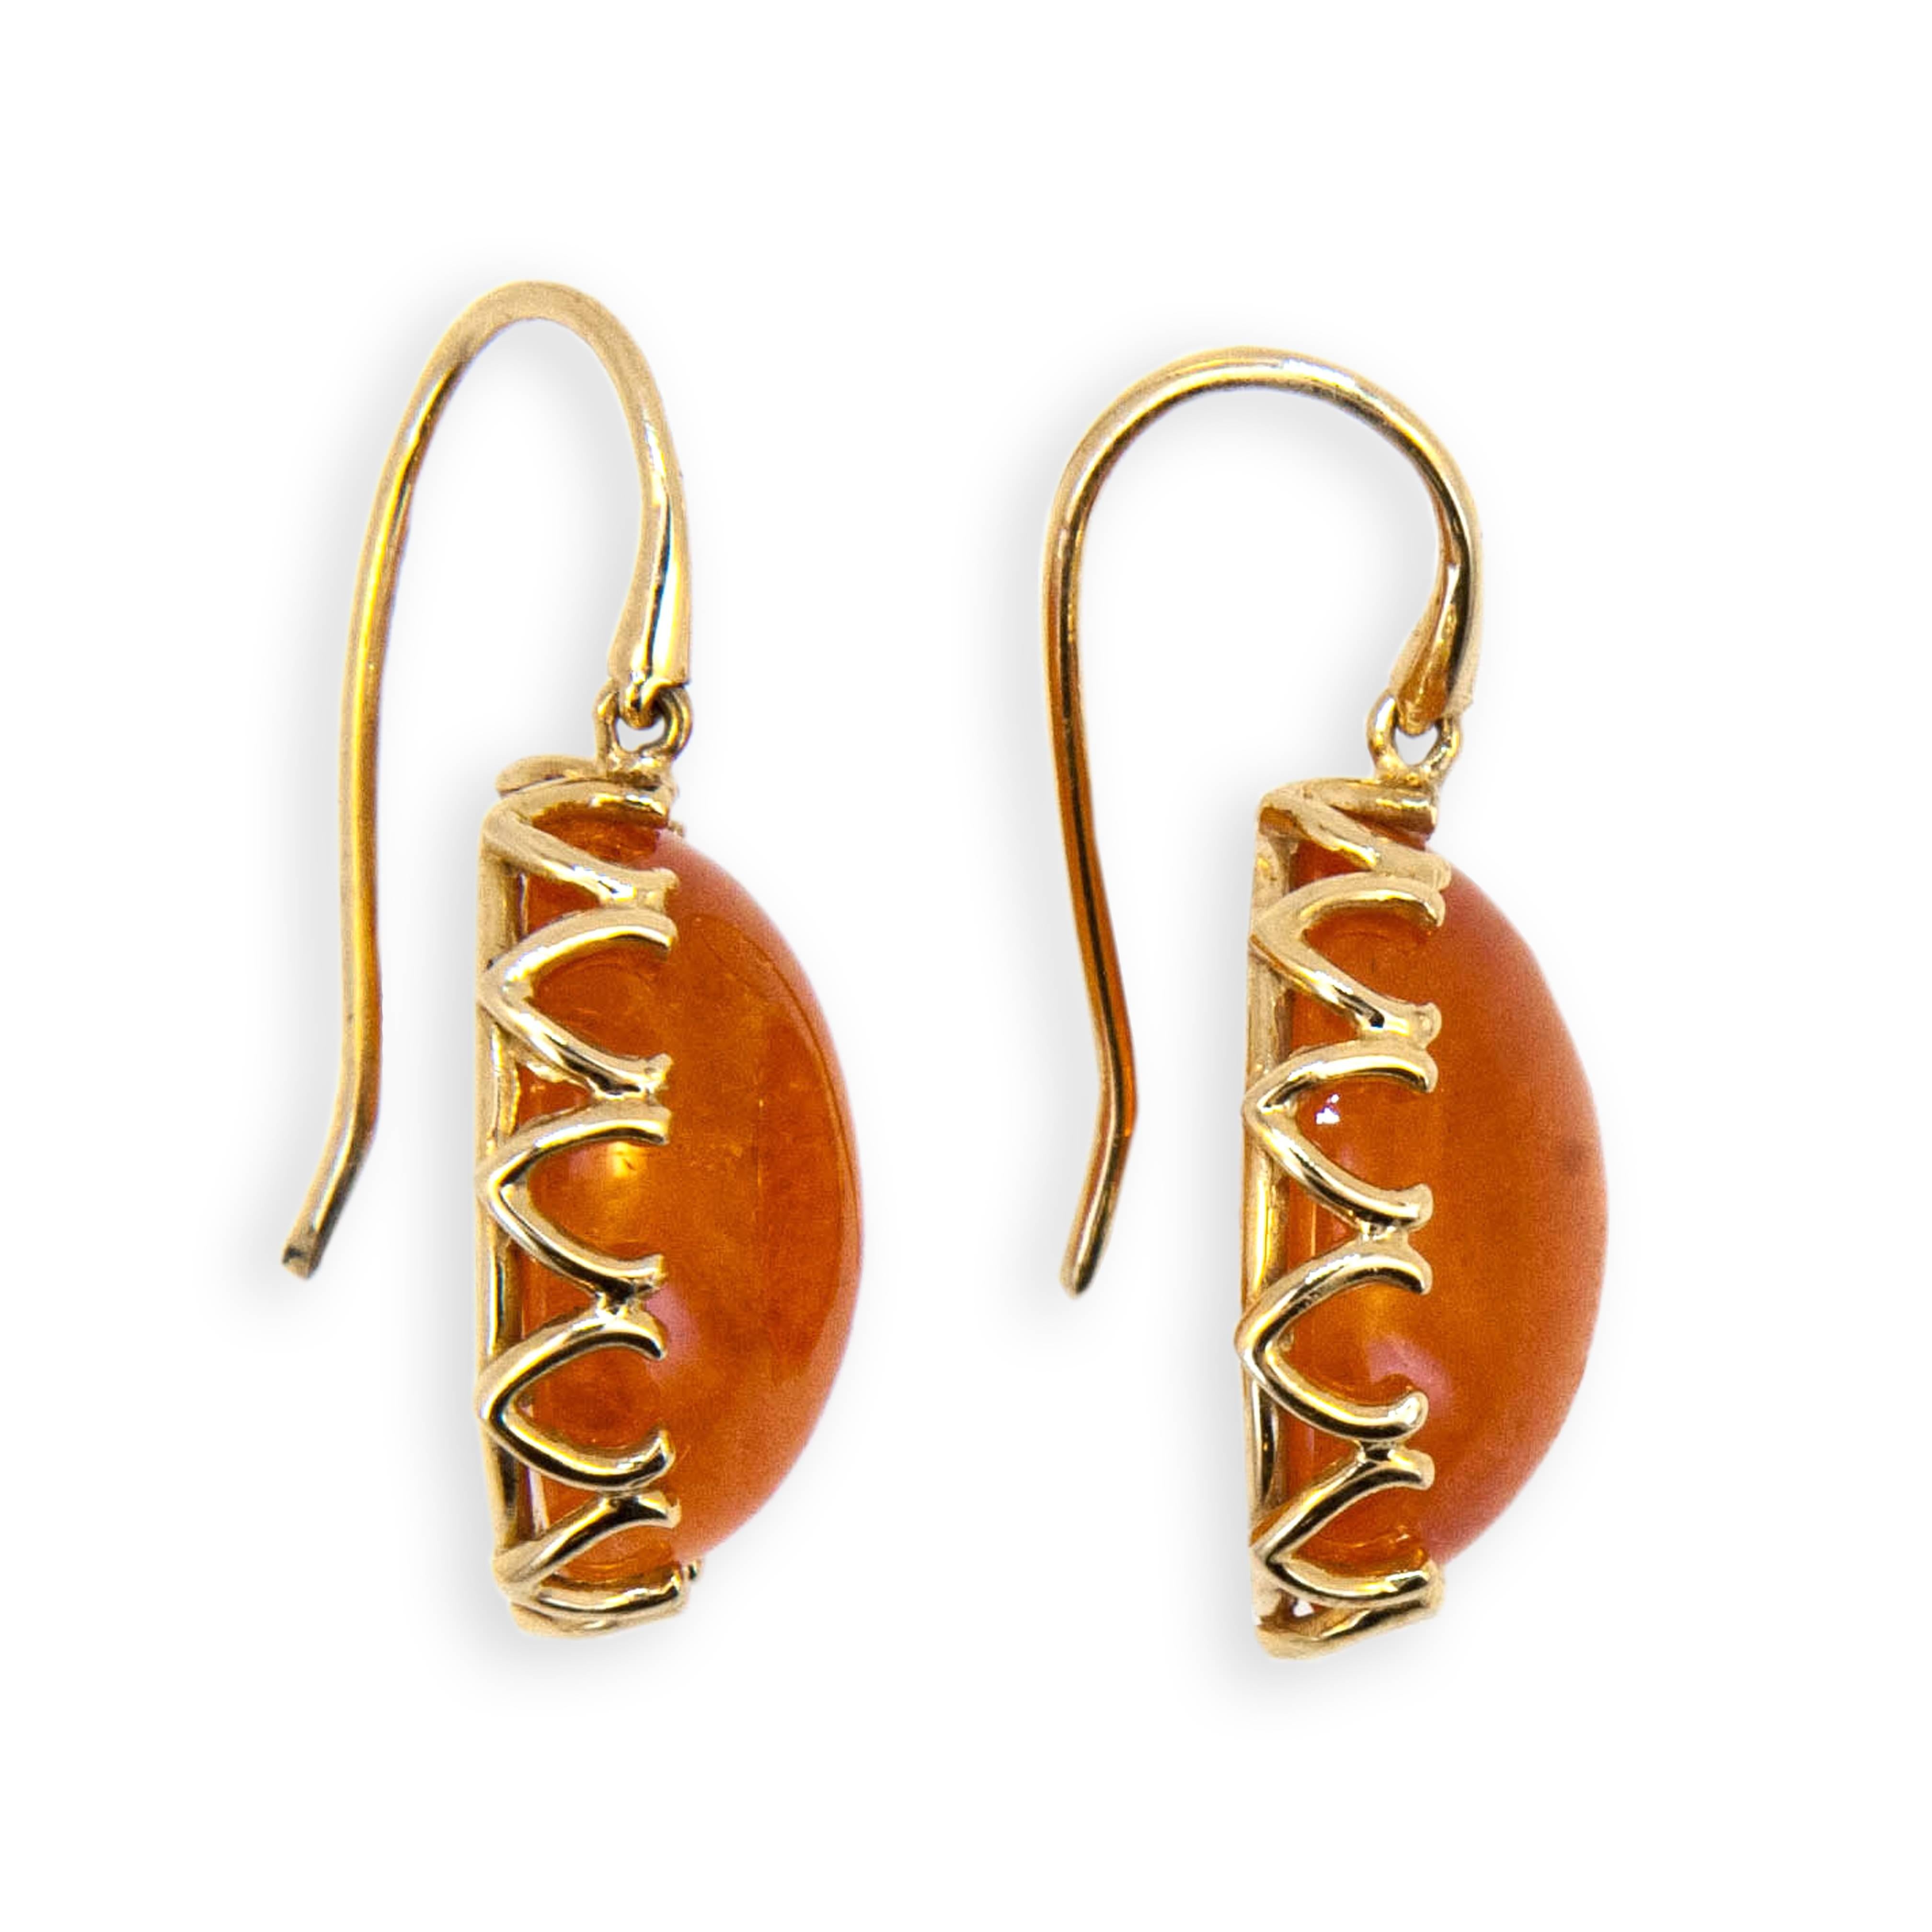 14 karat yellow gold earrings V scalloped bezel, each set with one oval cabochon Mandarin Garnet 25.44 carats total weight. Wires.
